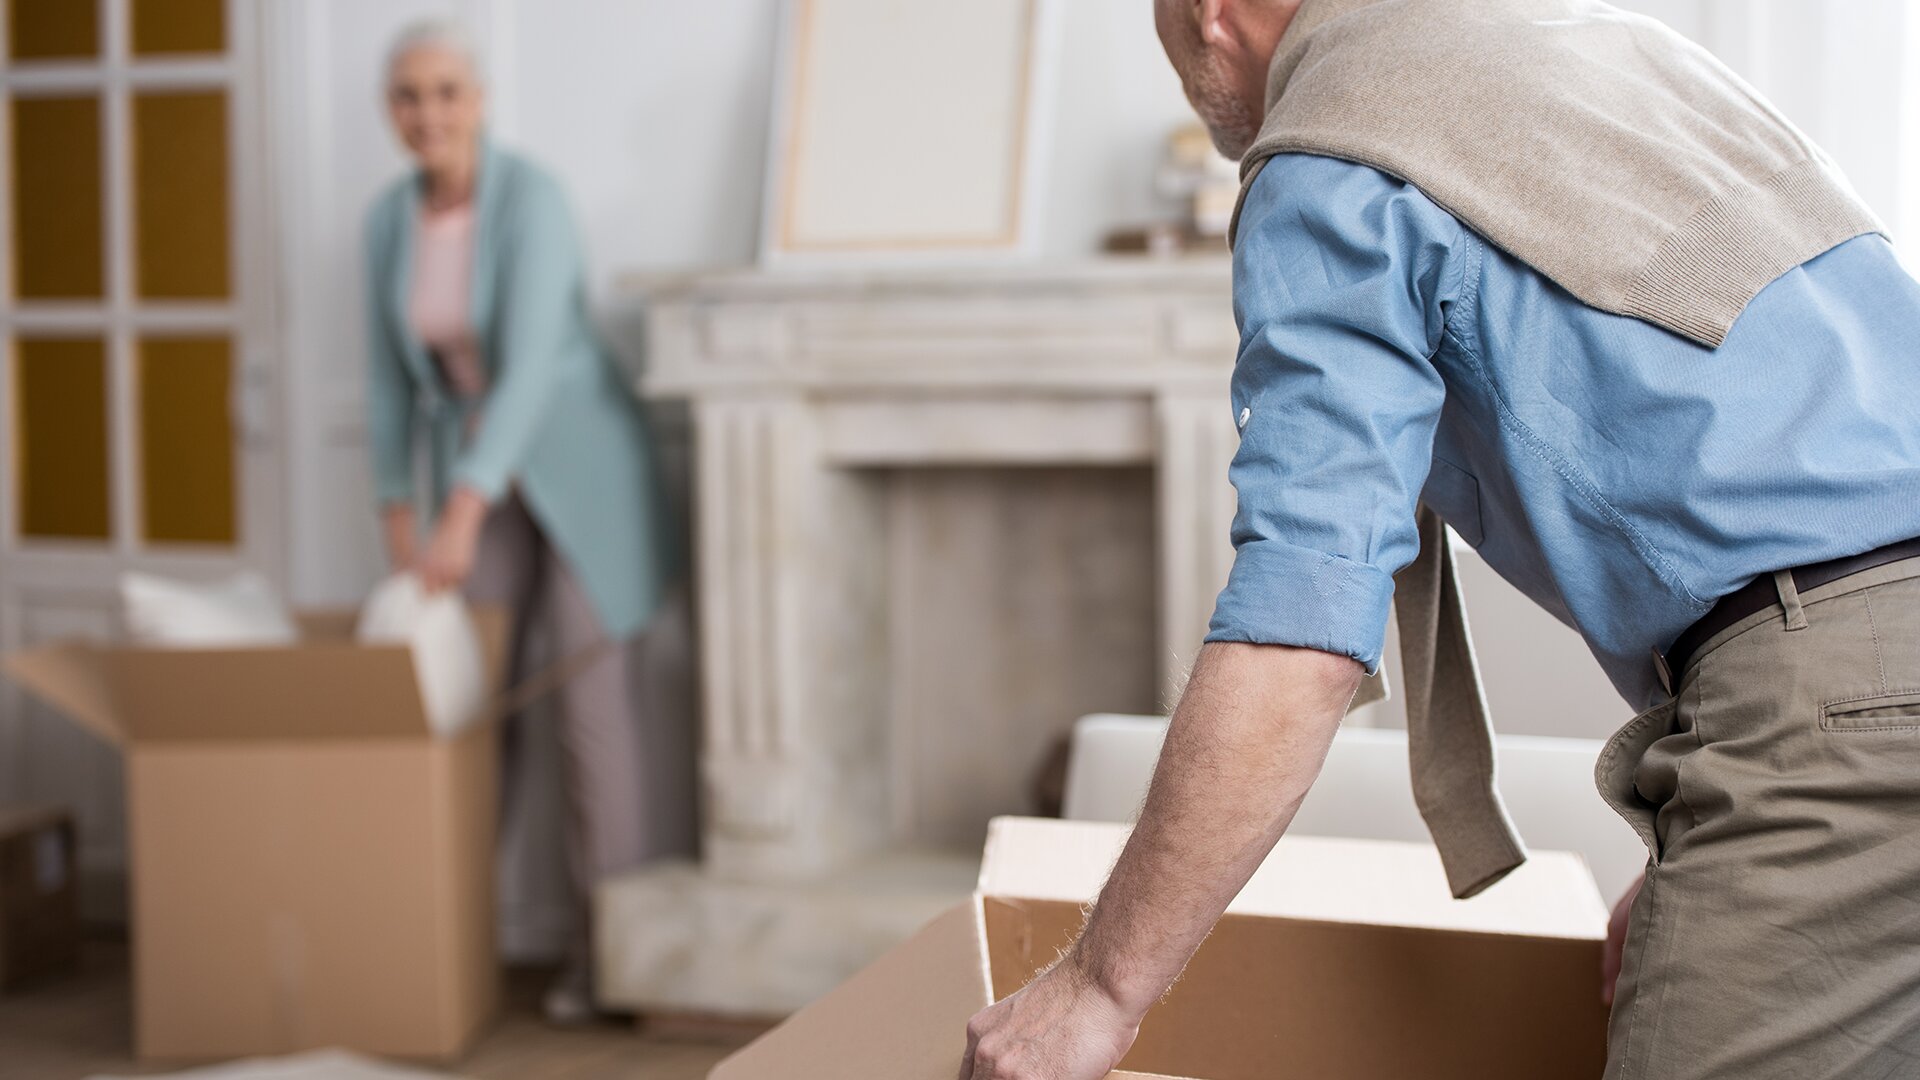 Webinar: Moving? Downsizing? Clearing Out?